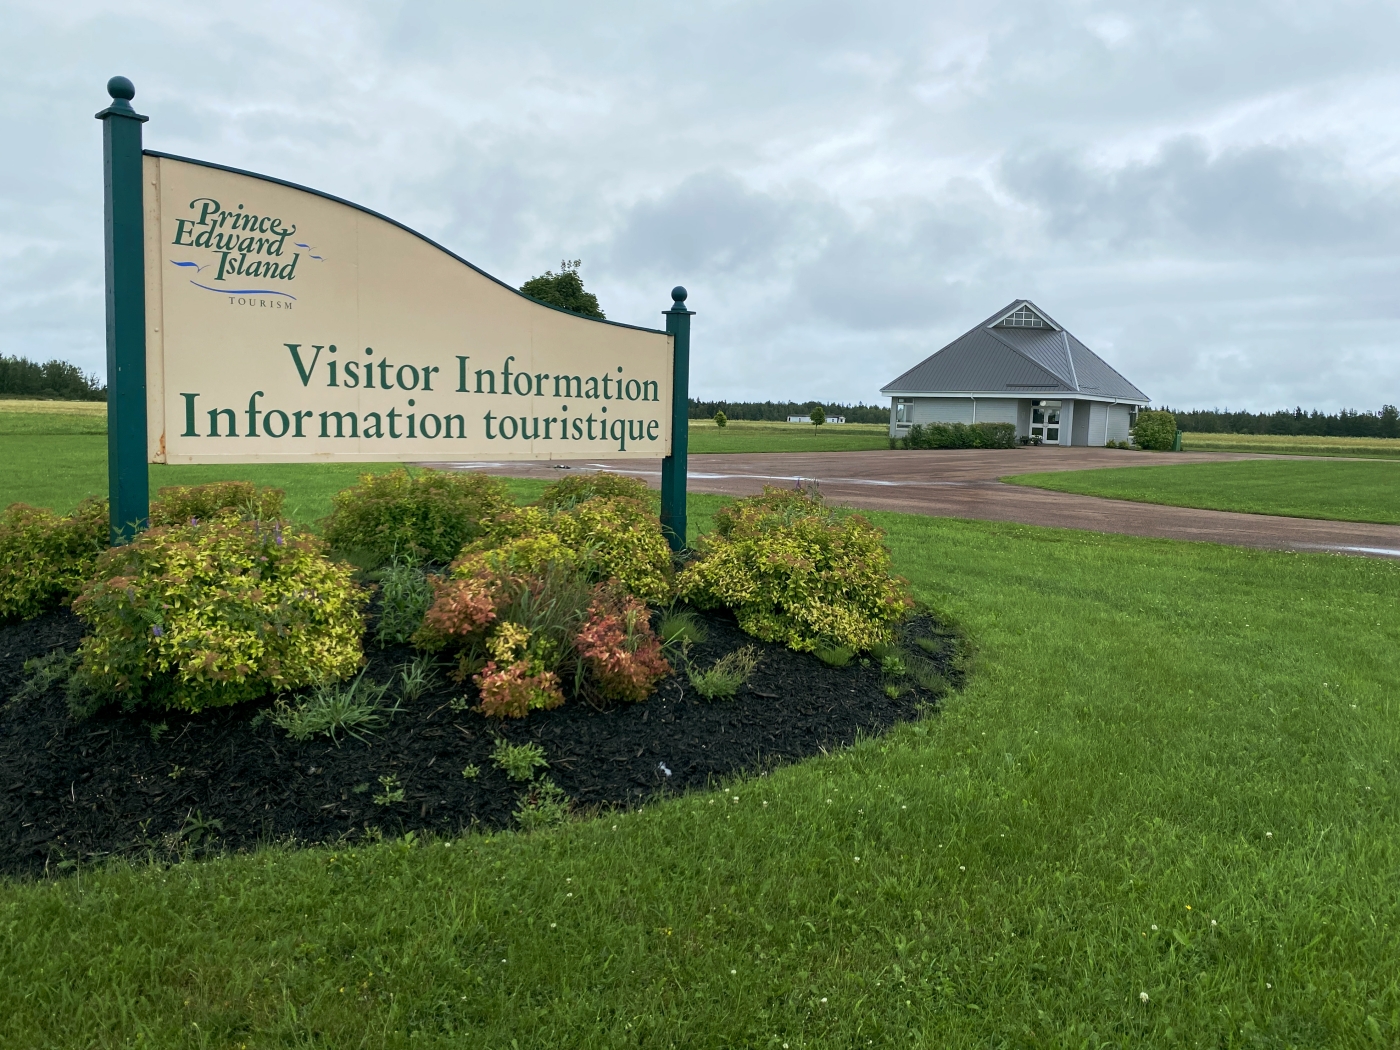 Exterior view of West Prince Visitor Information Centre with sign in foreground and building in background